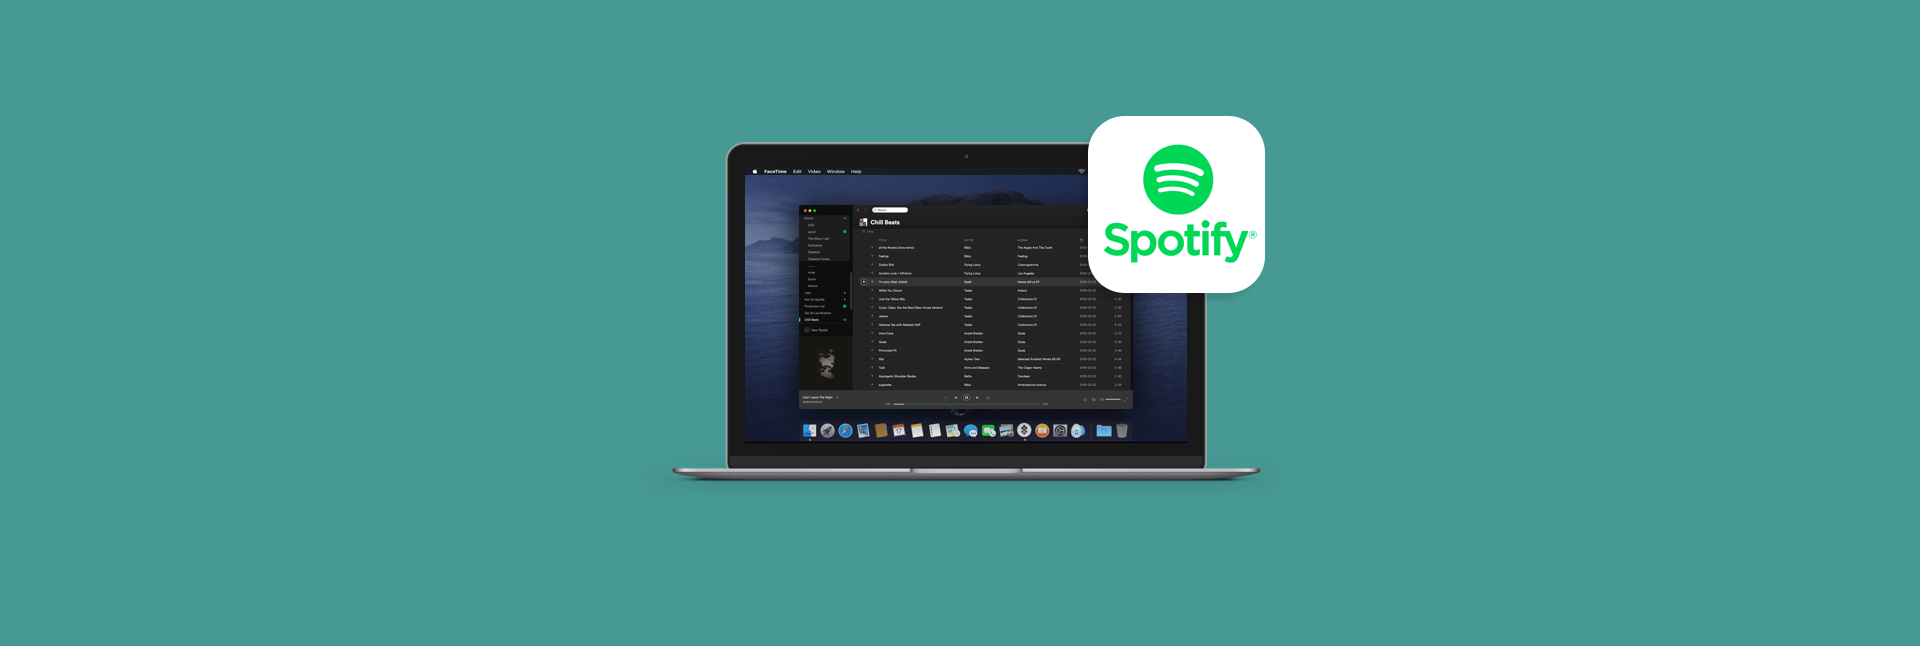 spotify for the mac